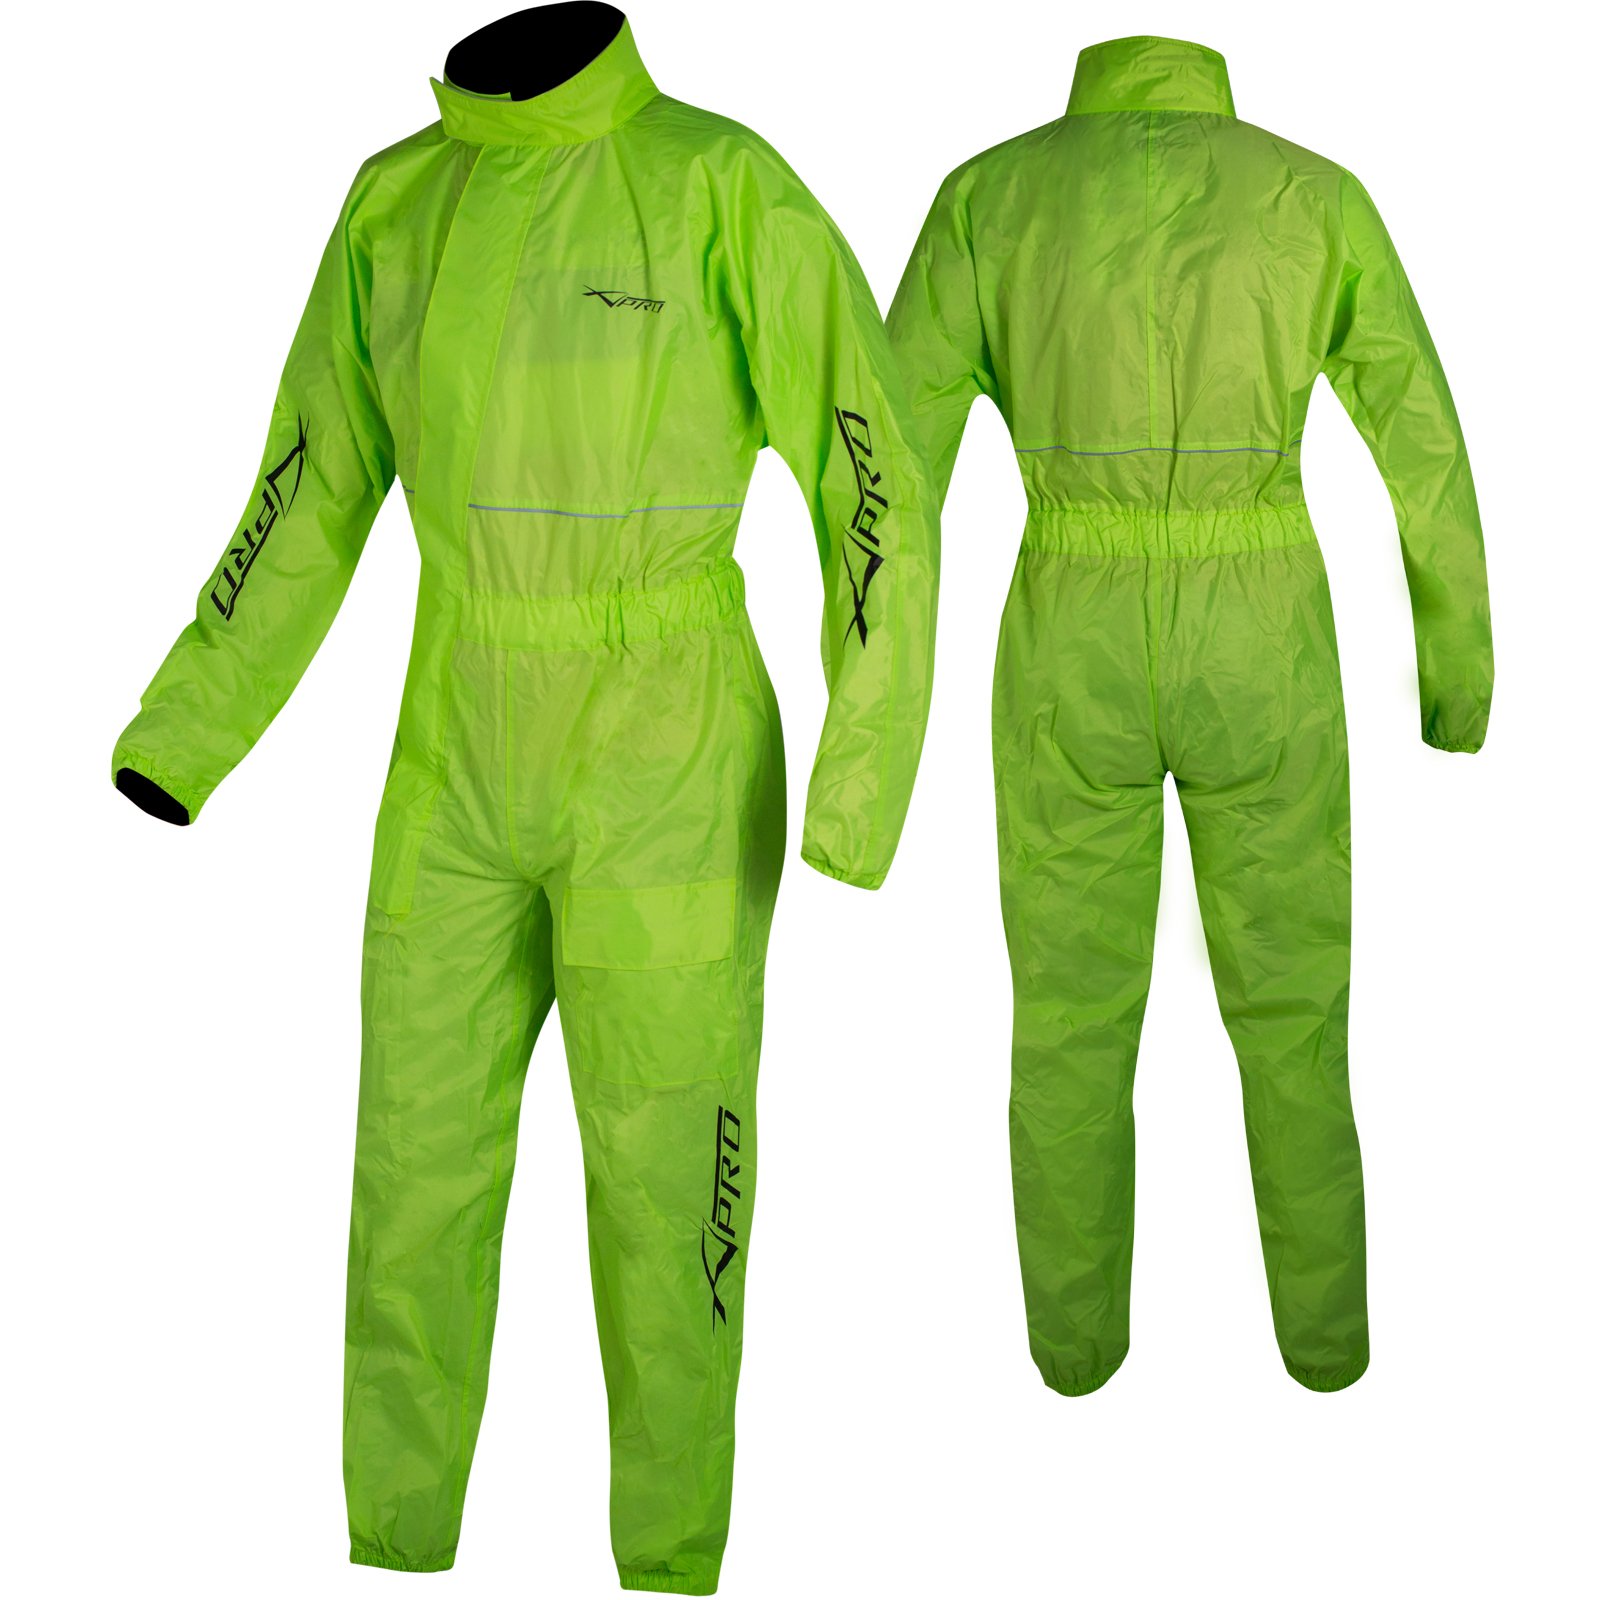 A-Pro Motorcycle Motorbike Waterproof Full Body One 1 pc Rain Over Suit Fluo 3XL von A-Pro